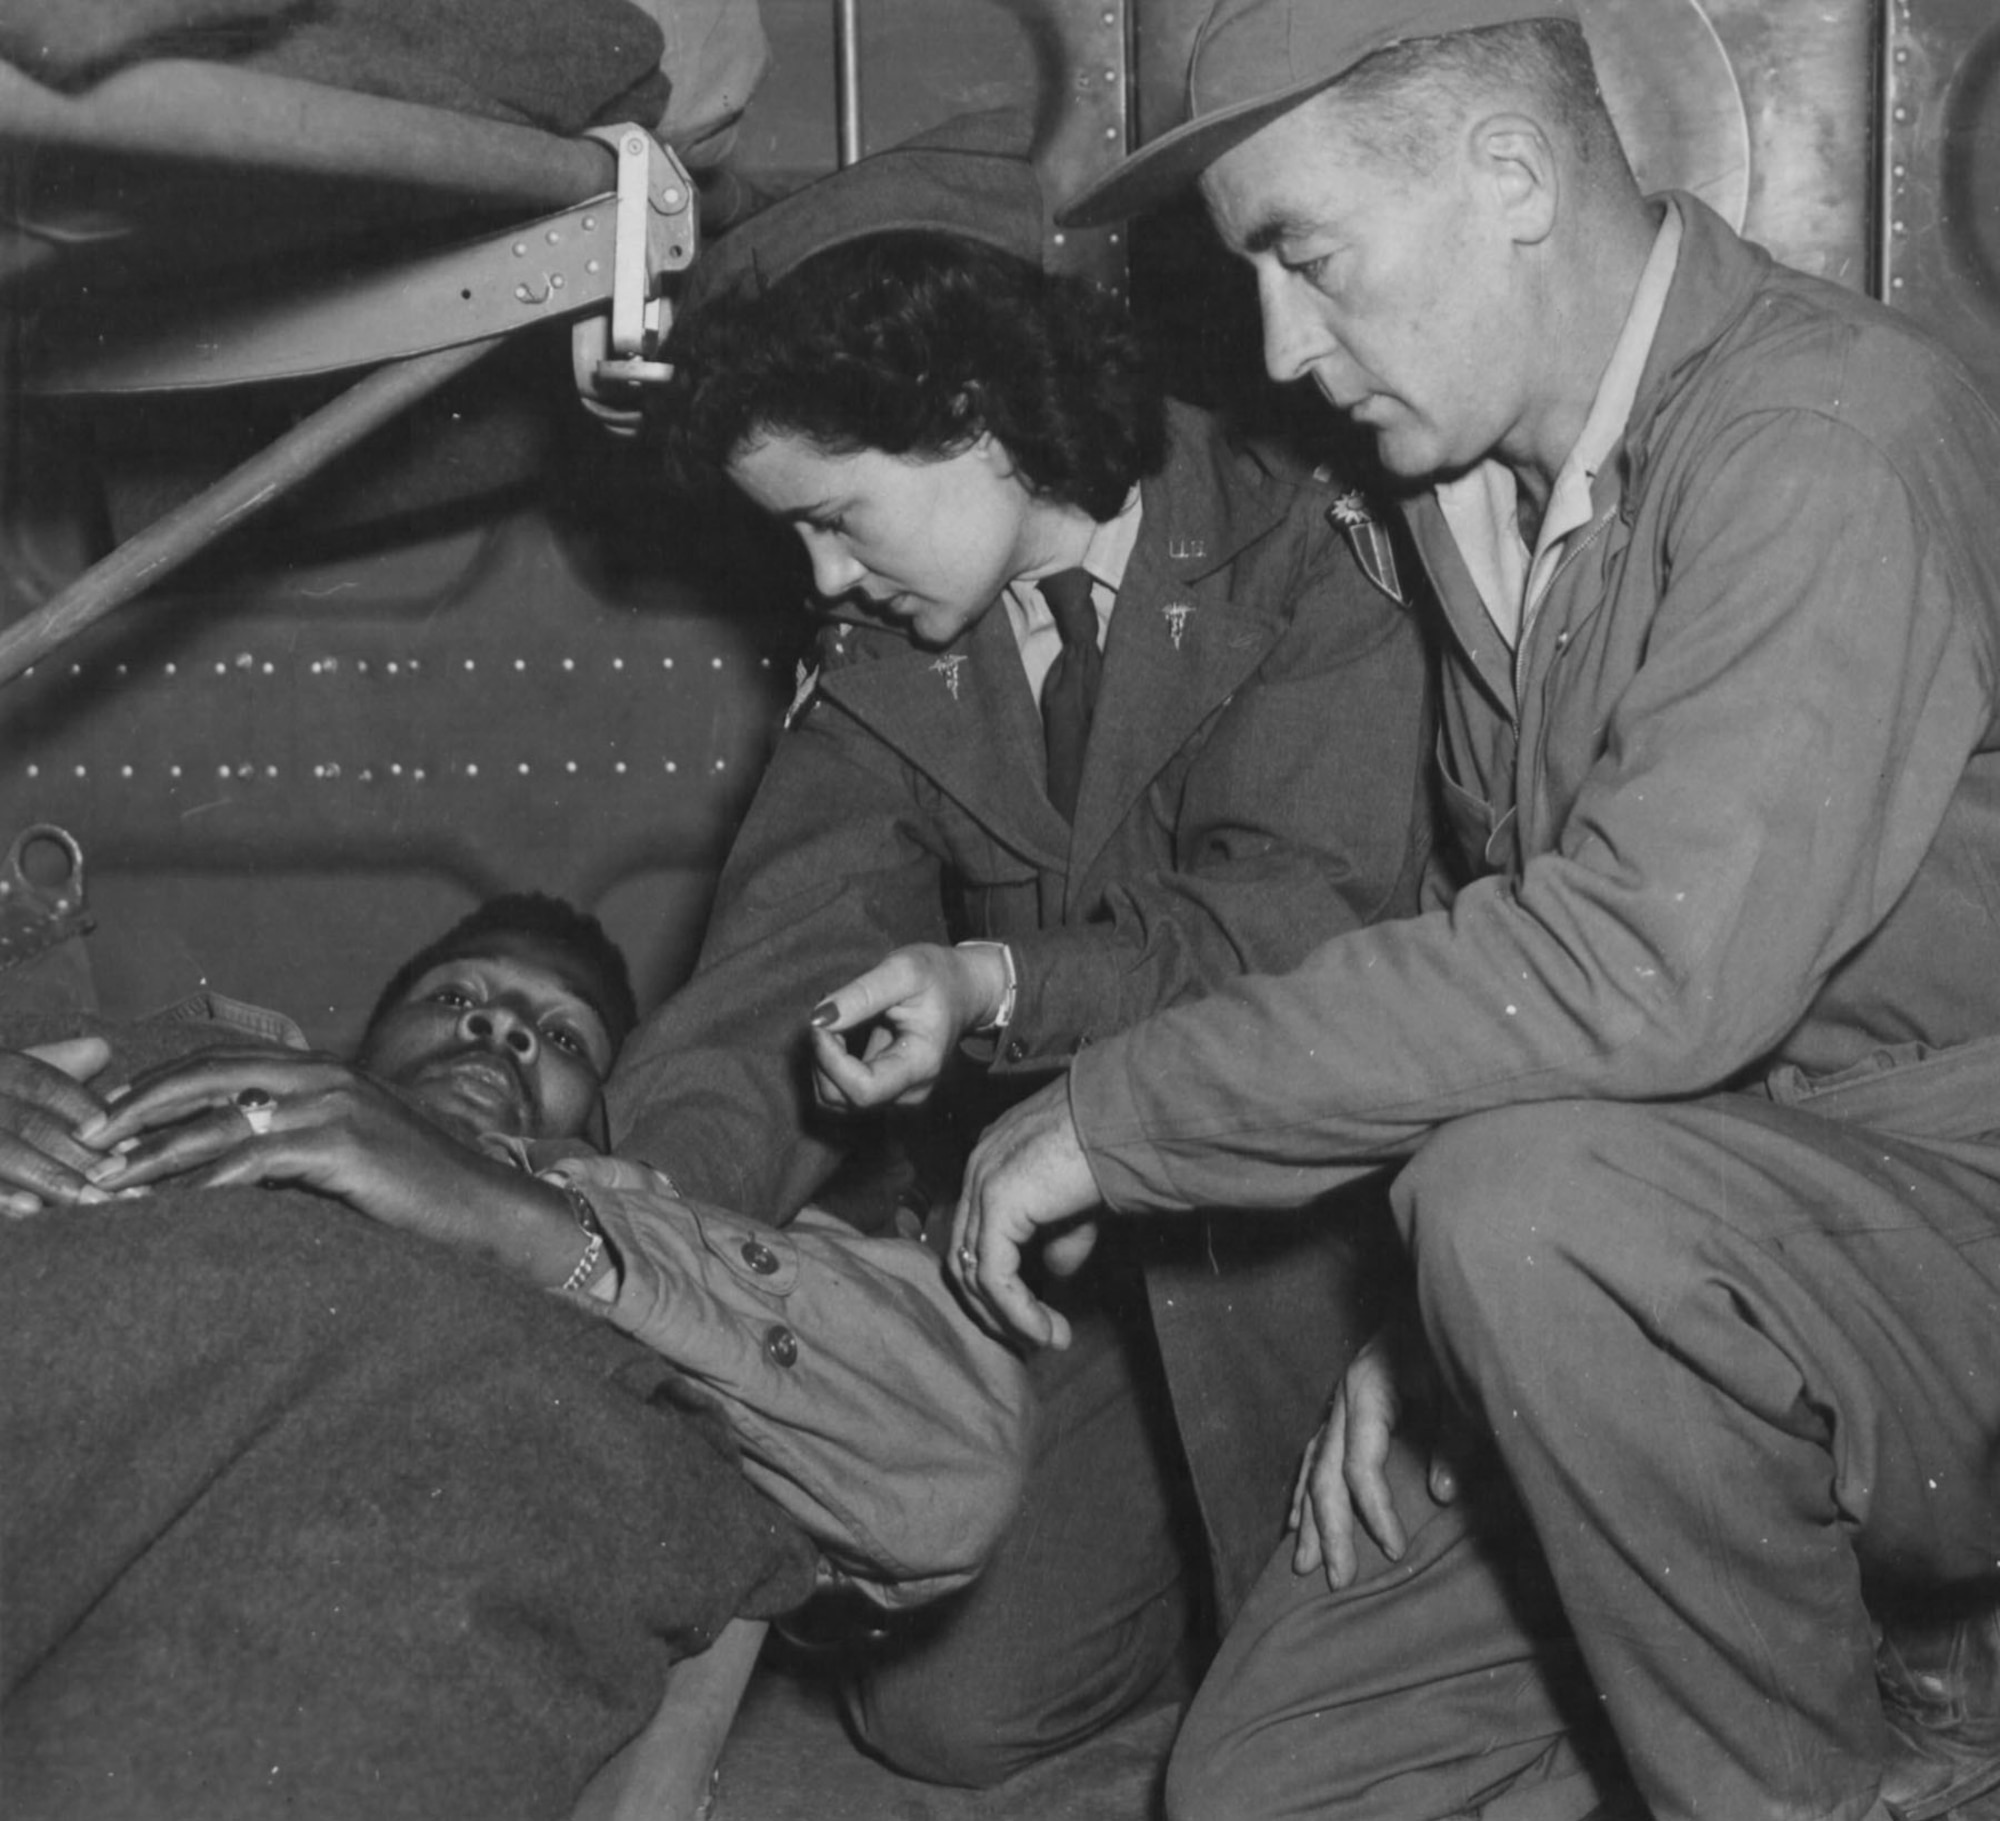 A C-47 air evacuation team from the 803rd Air Evacuation Transportation Squadron, Lt. Pauline Curry and Tech. Sgt. Lewis Marker, check a patient on a flight over India. (U.S. Air Force photo)